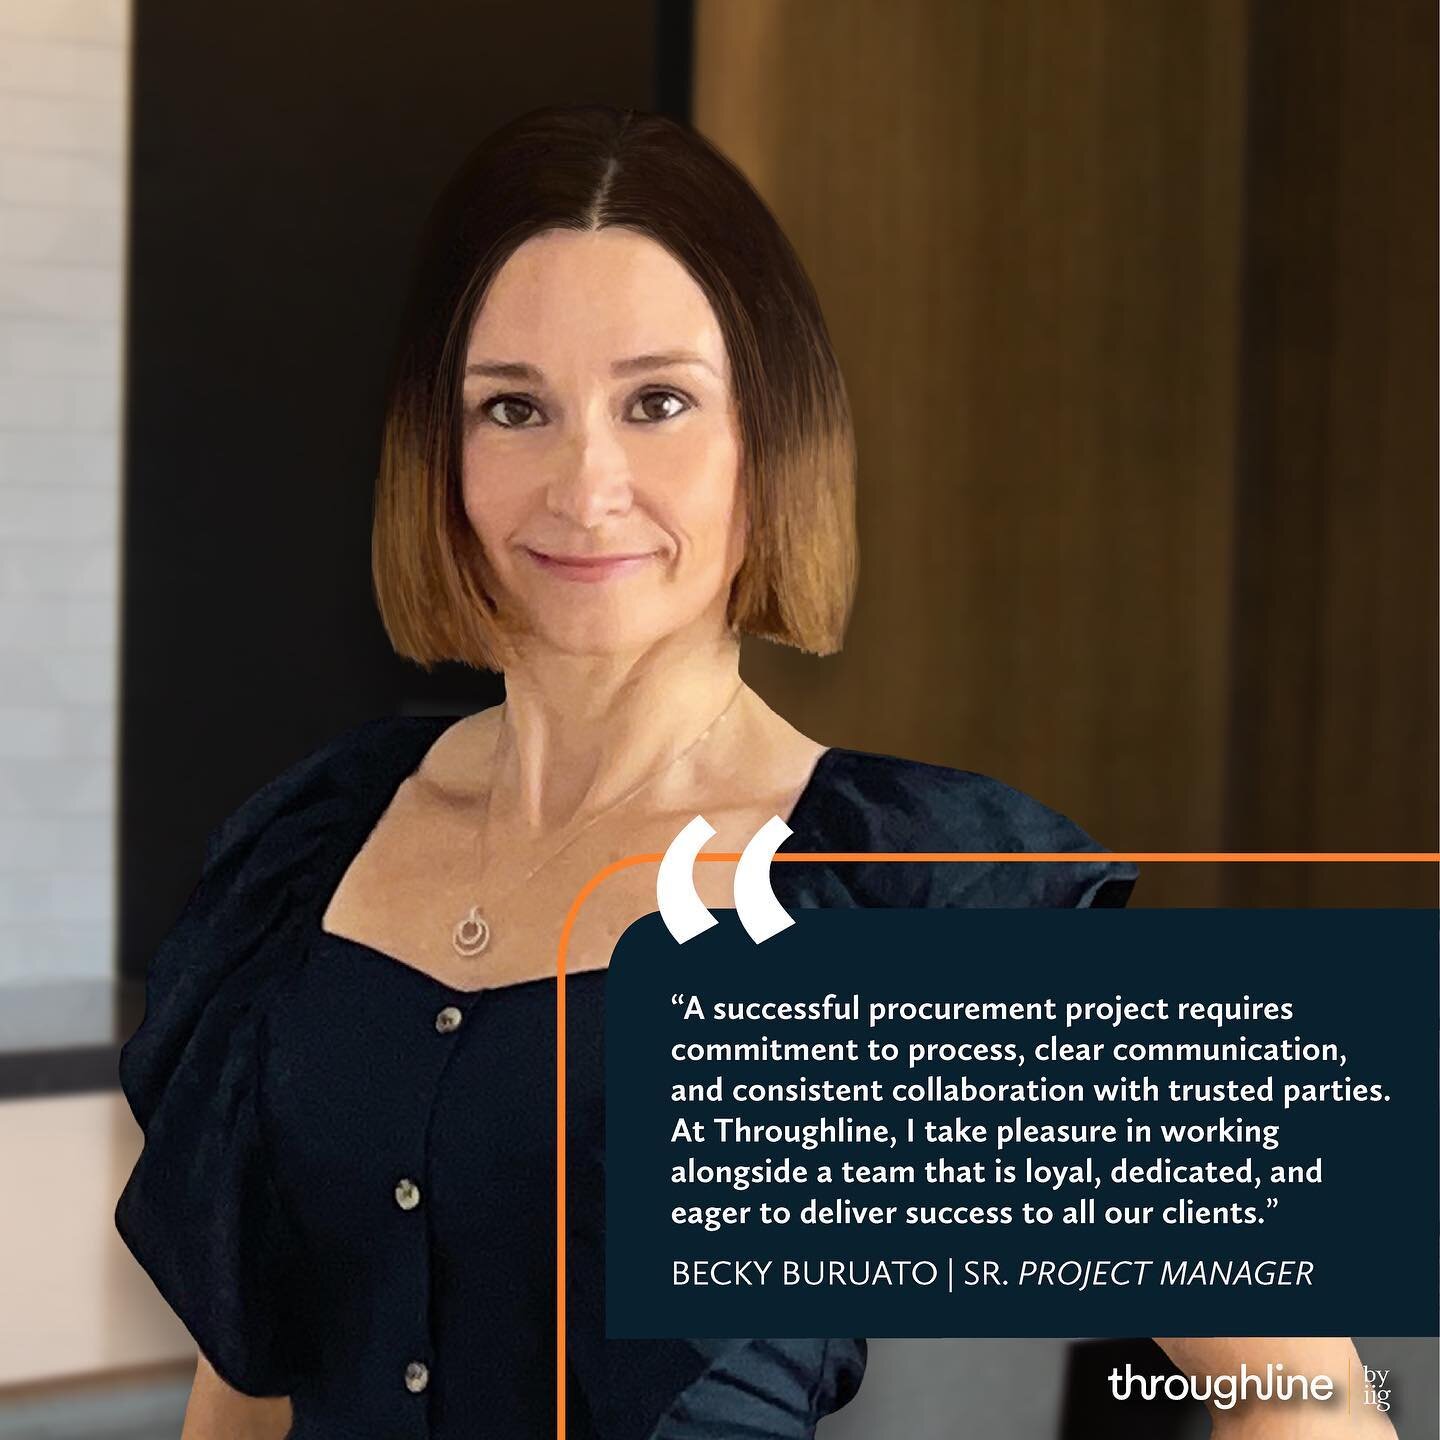 Meet Becky Buruato, Sr. Project Manager at Throughline by IIG.👋&nbsp;

Becky, along with her 8-year-old son, 2 dogs and fish, call Illinois home. With over 15 years in hospitality procurement, Becky Buruato is a leading expert in purchasing and proj